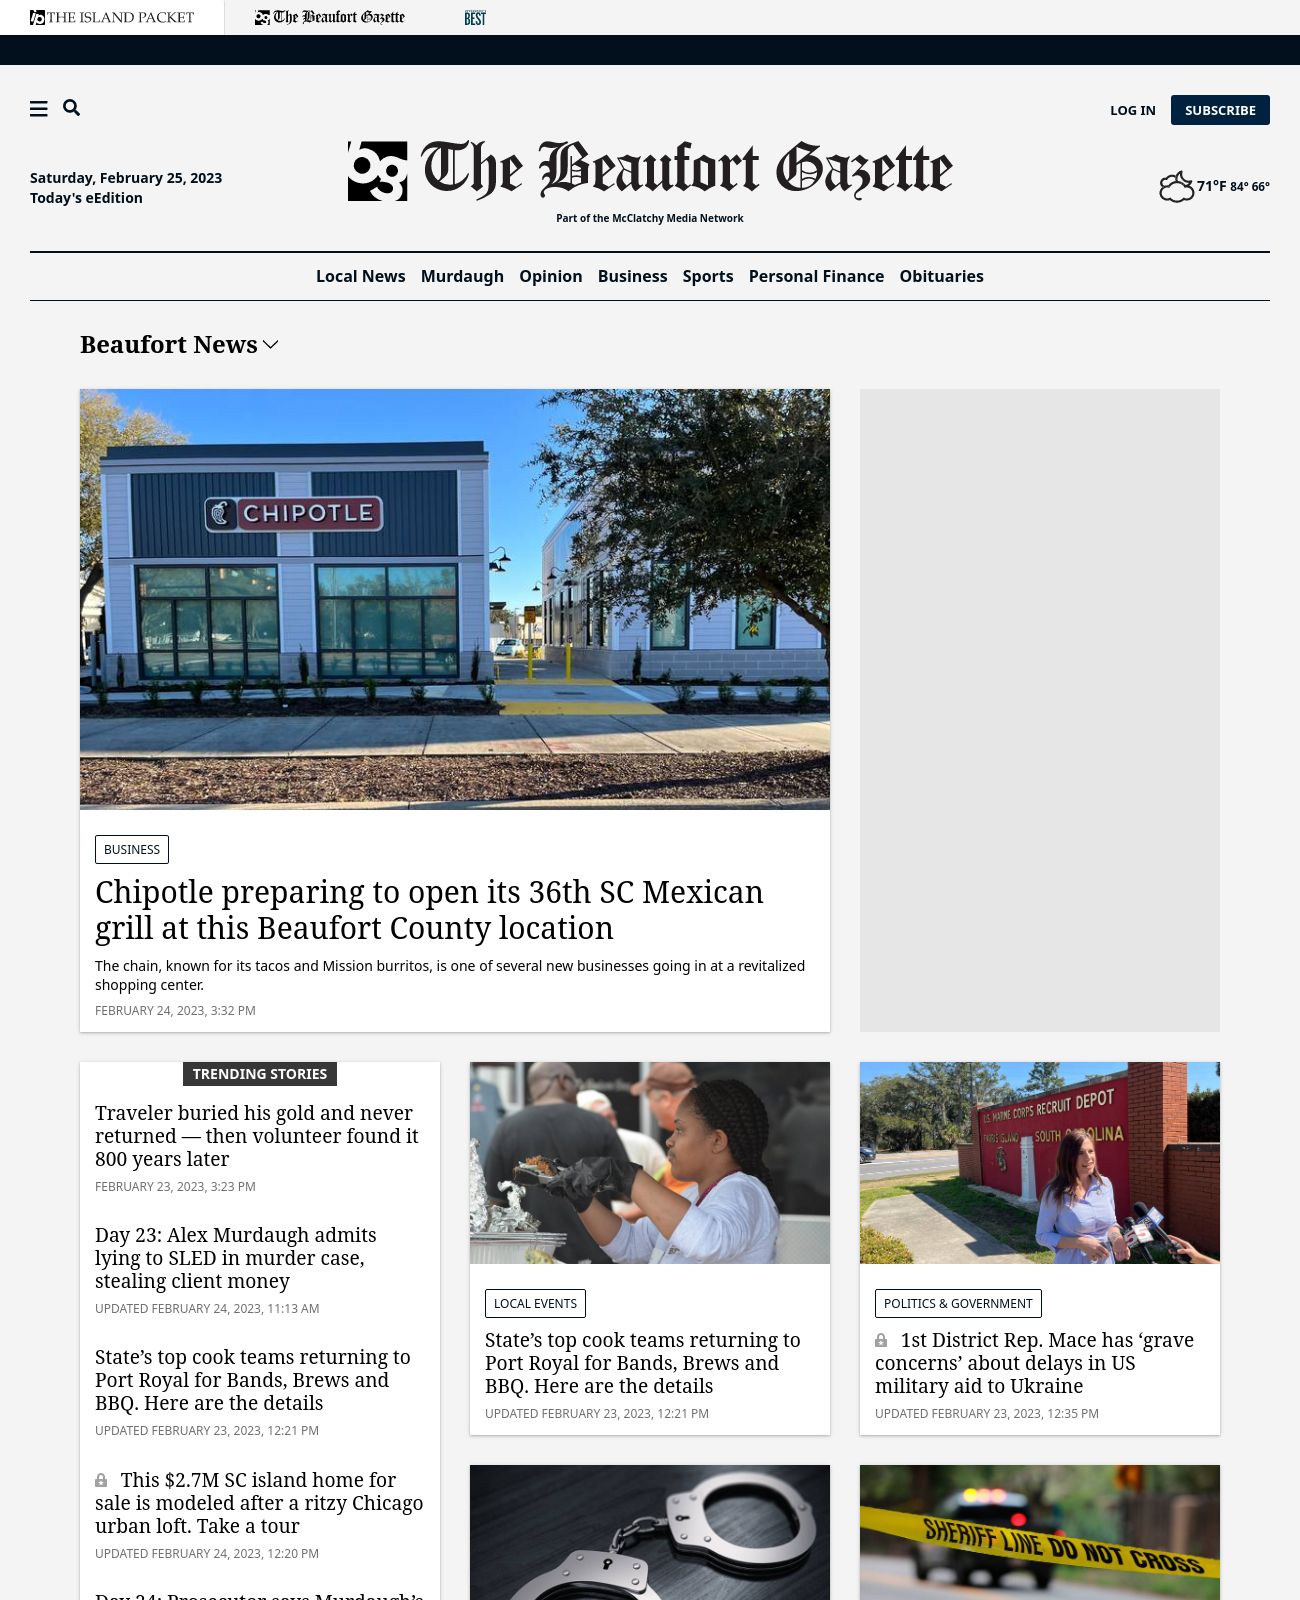 Beaufort Gazette at 2023-02-24 20:02:33-05:00 local time